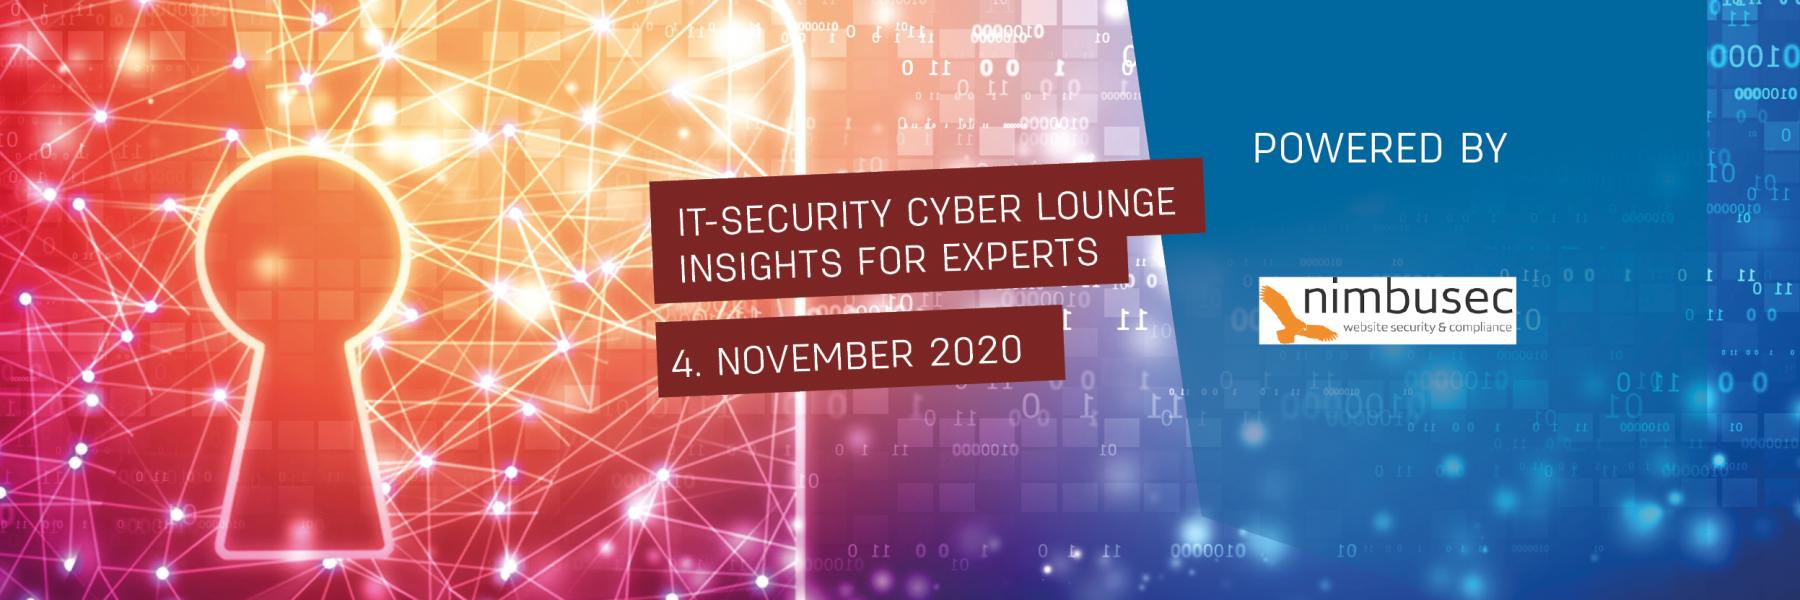 IT-Security CYBER Lounge